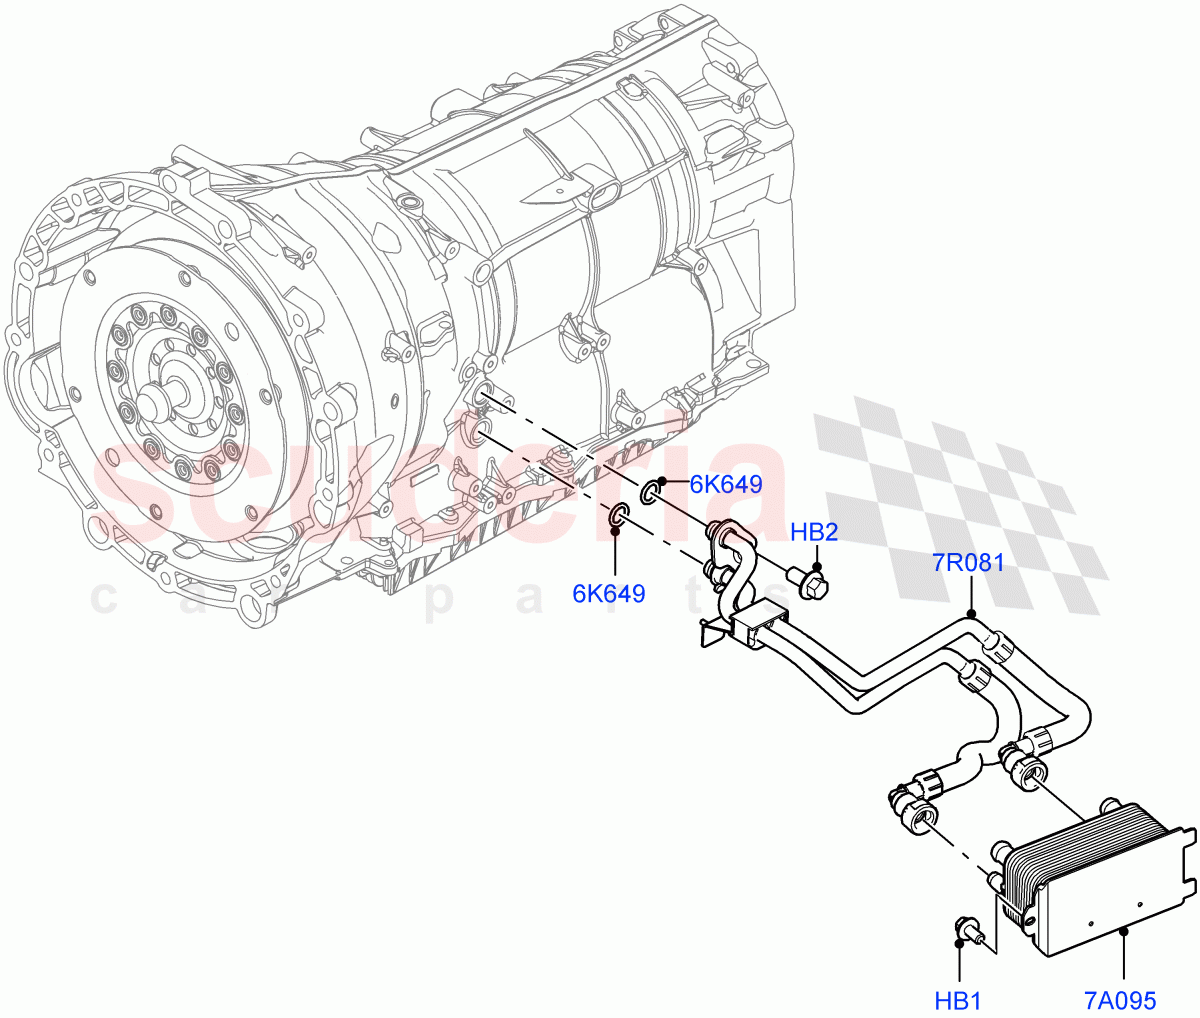 Transmission Cooling Systems(3.0L AJ20P6 Petrol High,8 Speed Auto Trans ZF 8HP76,3.0L AJ20D6 Diesel High)((V)FROMKA000001) of Land Rover Land Rover Range Rover Sport (2014+) [4.4 DOHC Diesel V8 DITC]